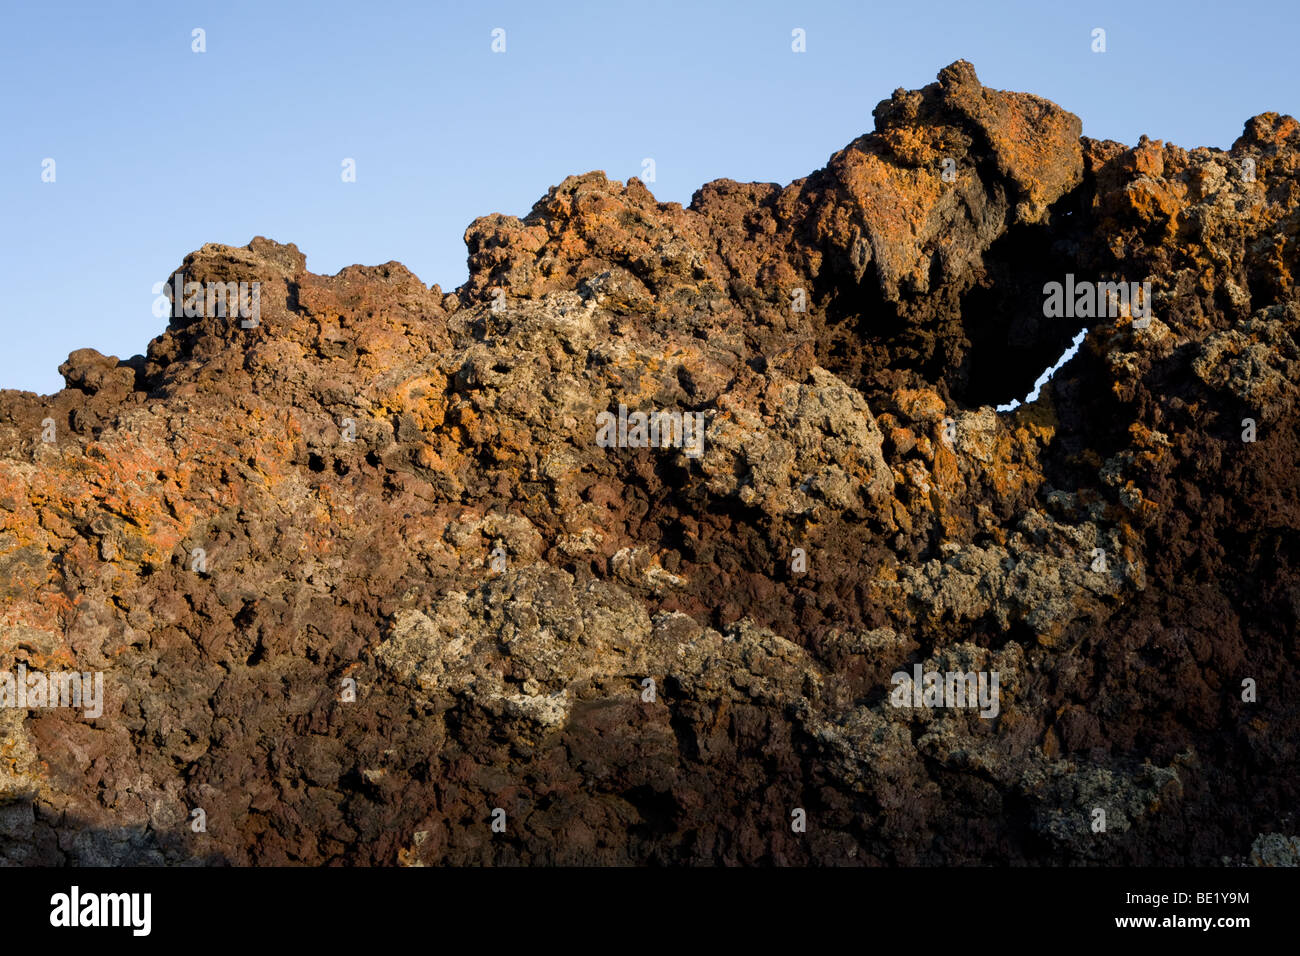 Cinder cones at Craters of the Moon National Monument in Idaho Stock Photo